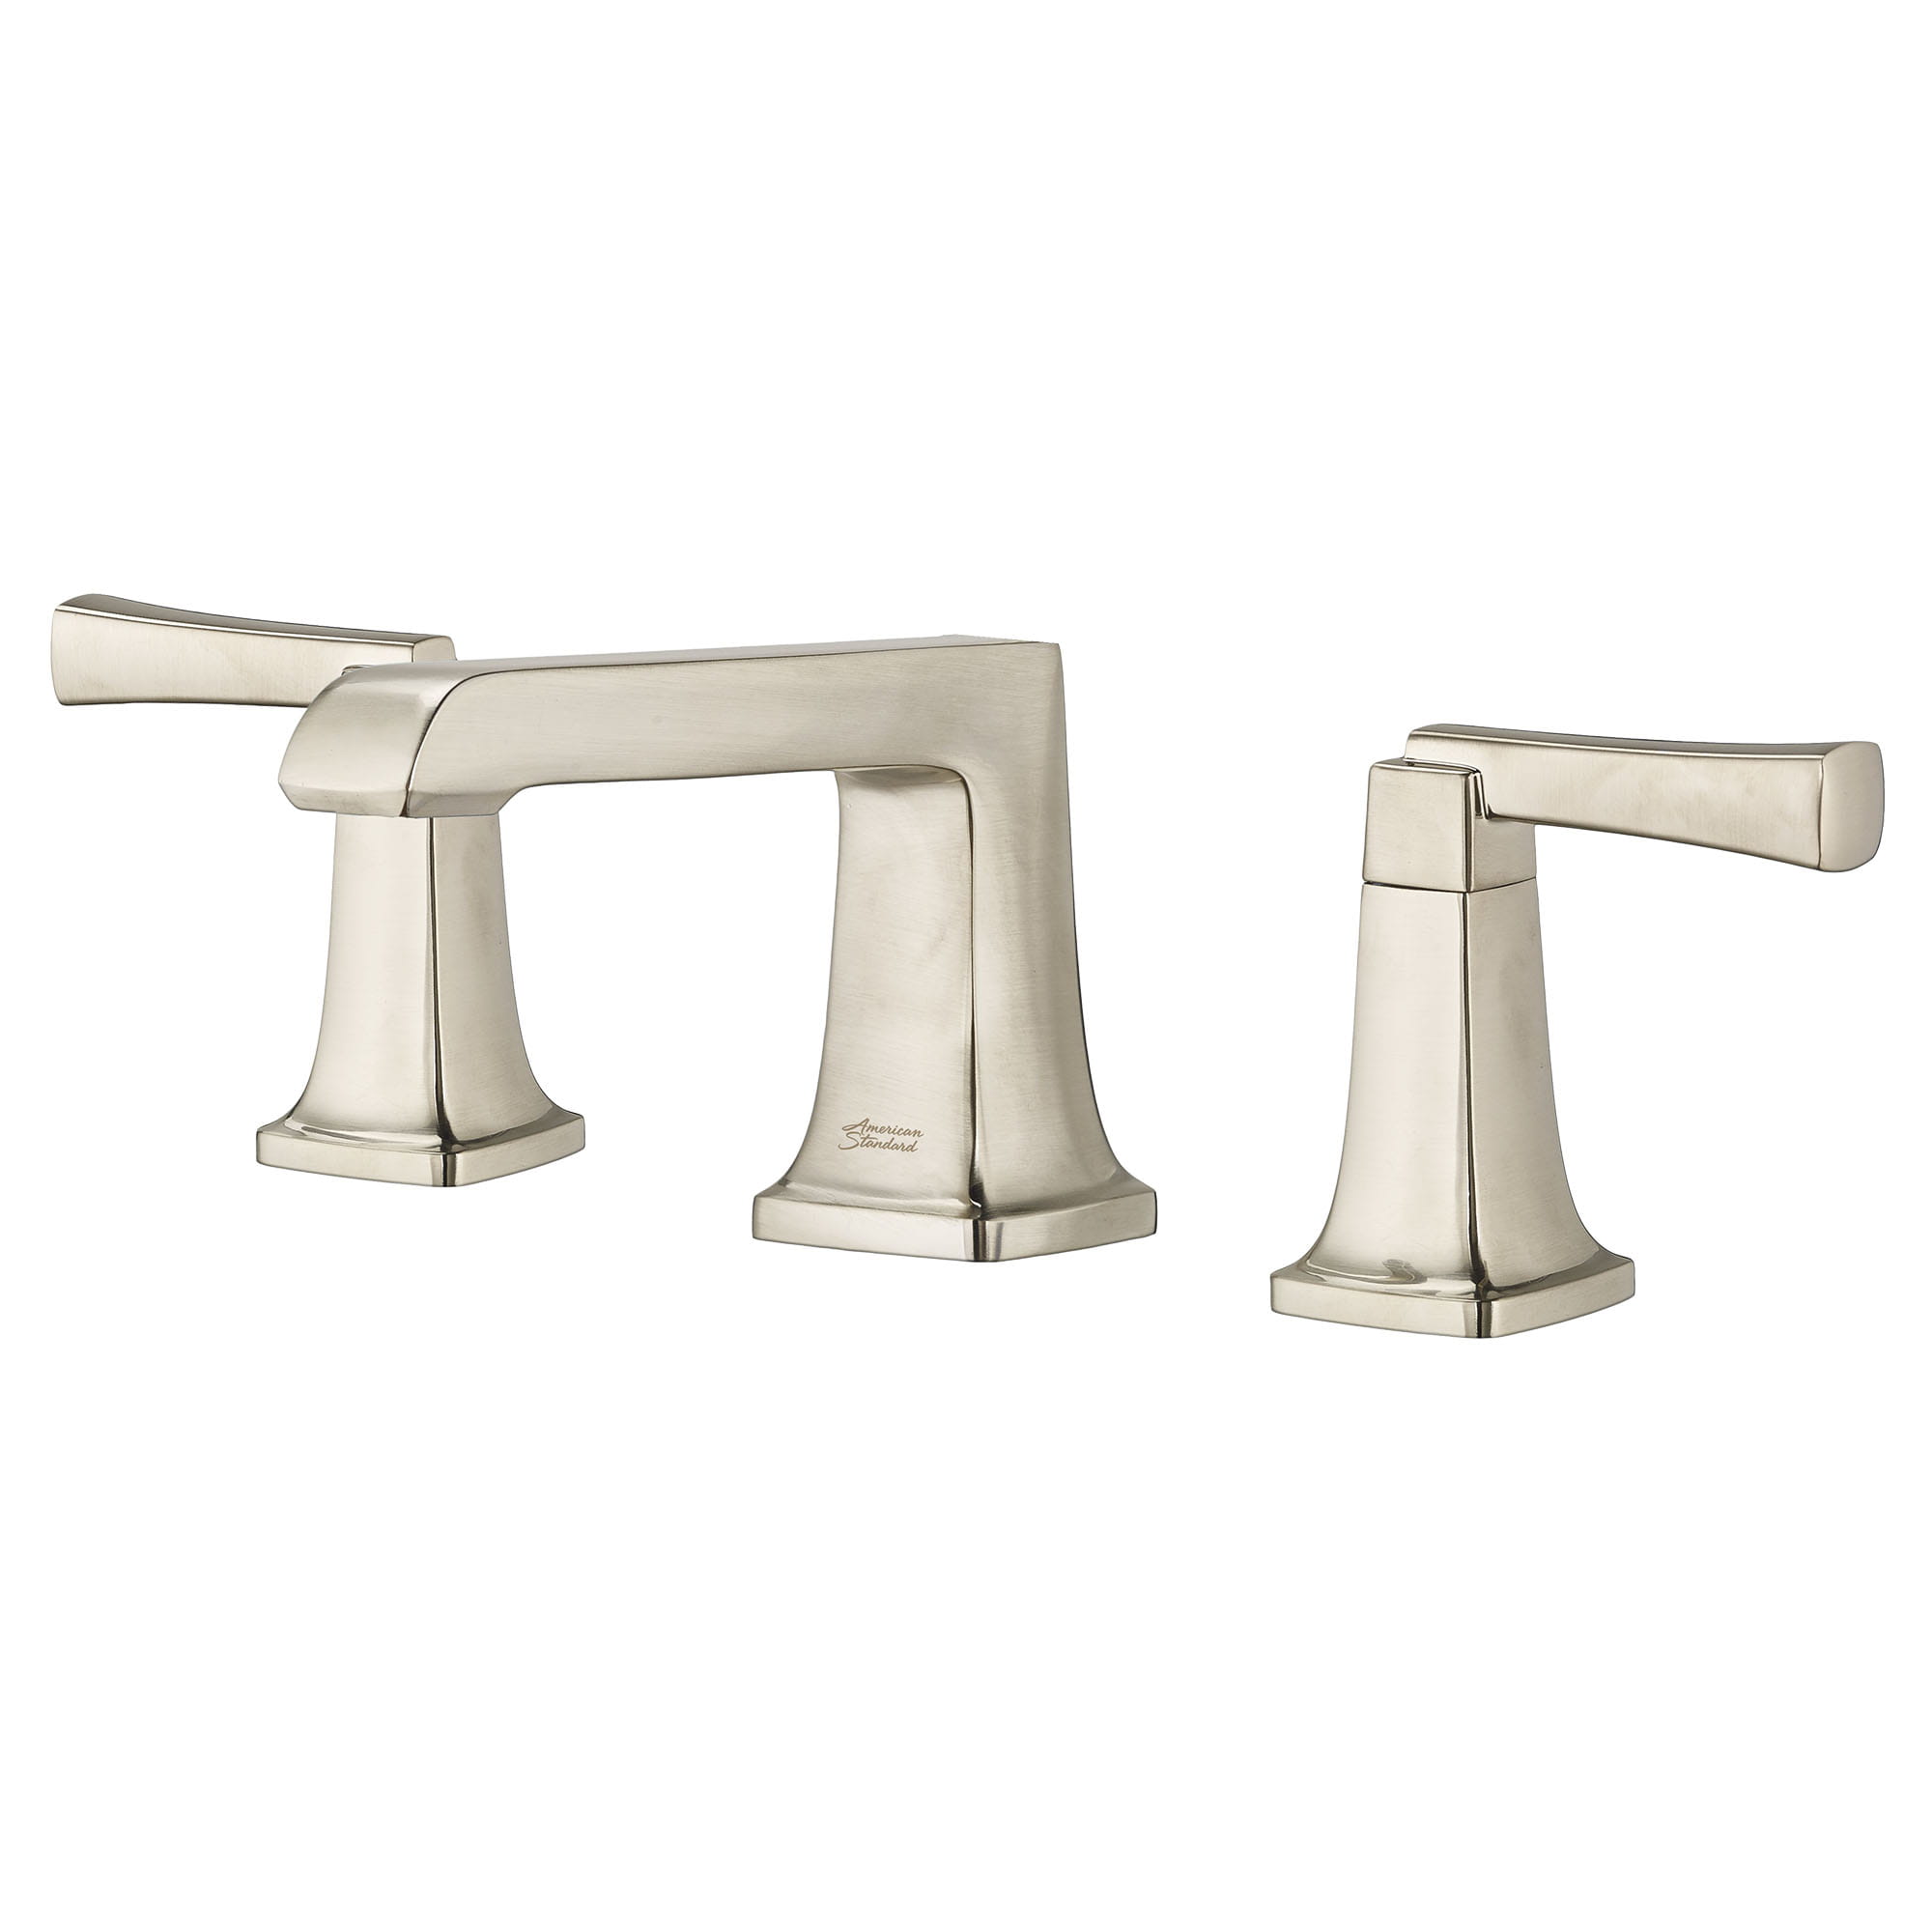 Townsend 8 Inch Widespread 2 Handle Bathroom Faucet 12 gpm 45 L min With Lever Handles   BRUSHED NICKEL